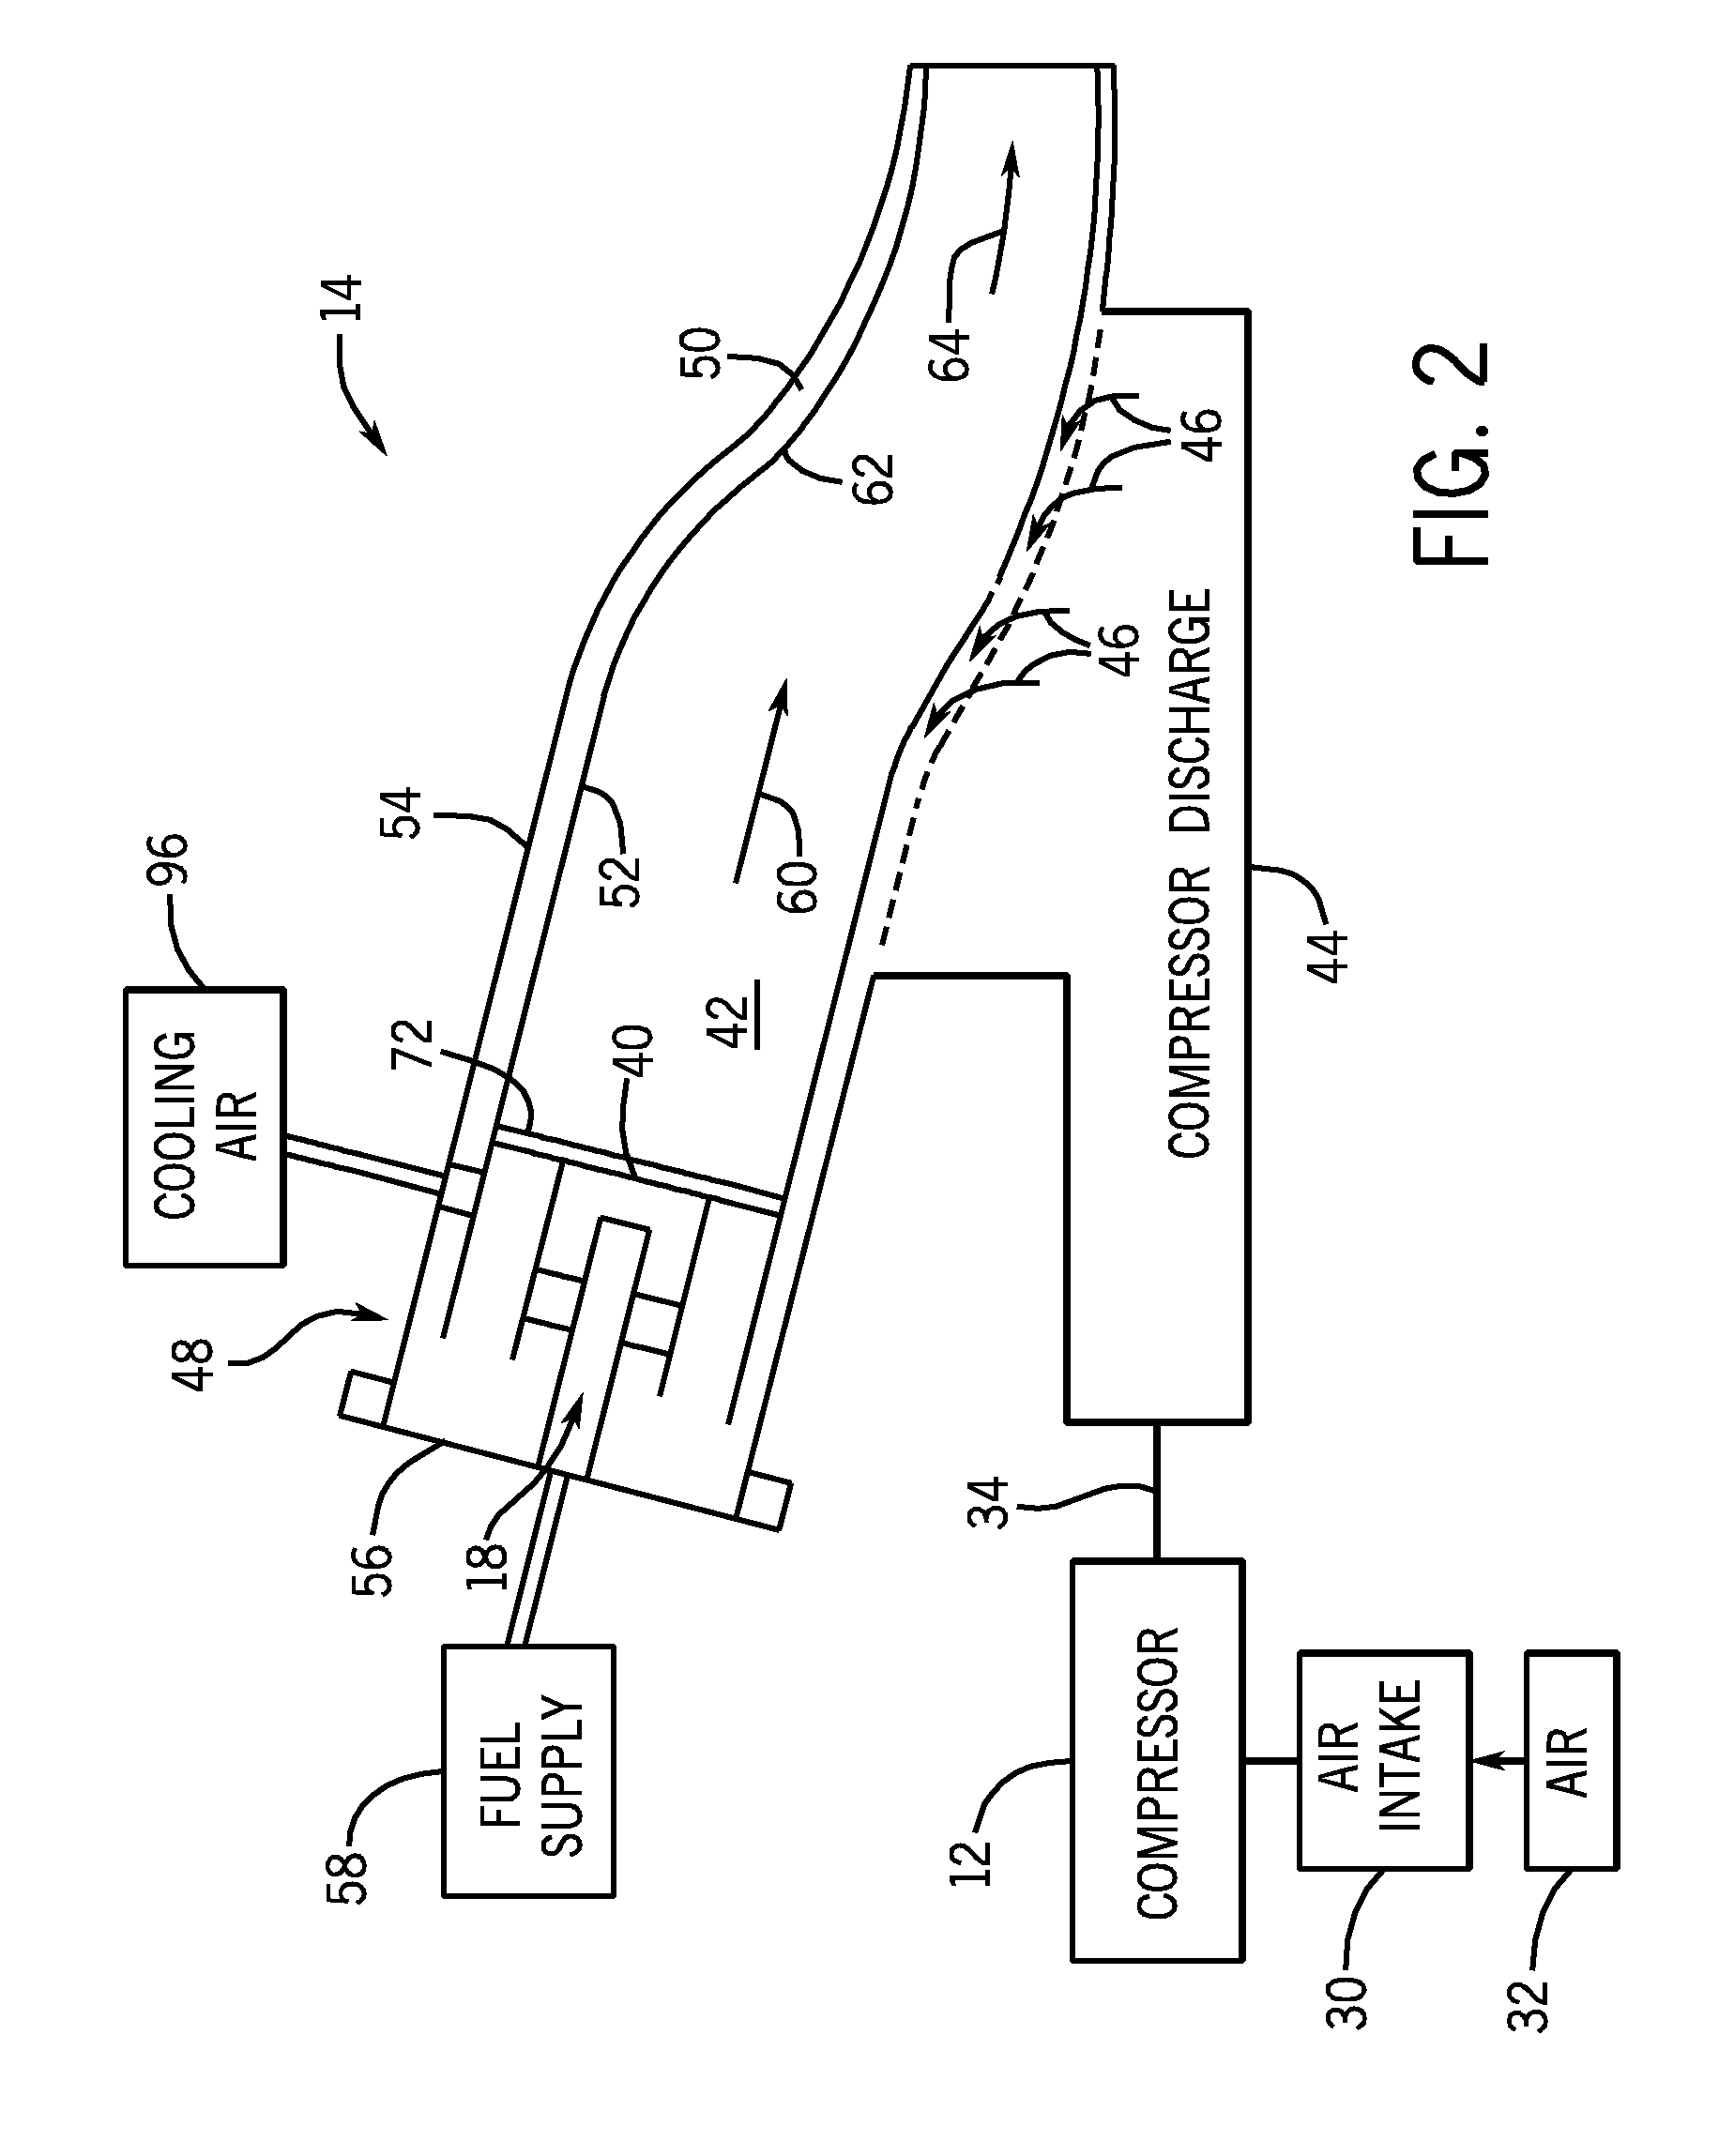 Effusion plate using additive manufacturing methods